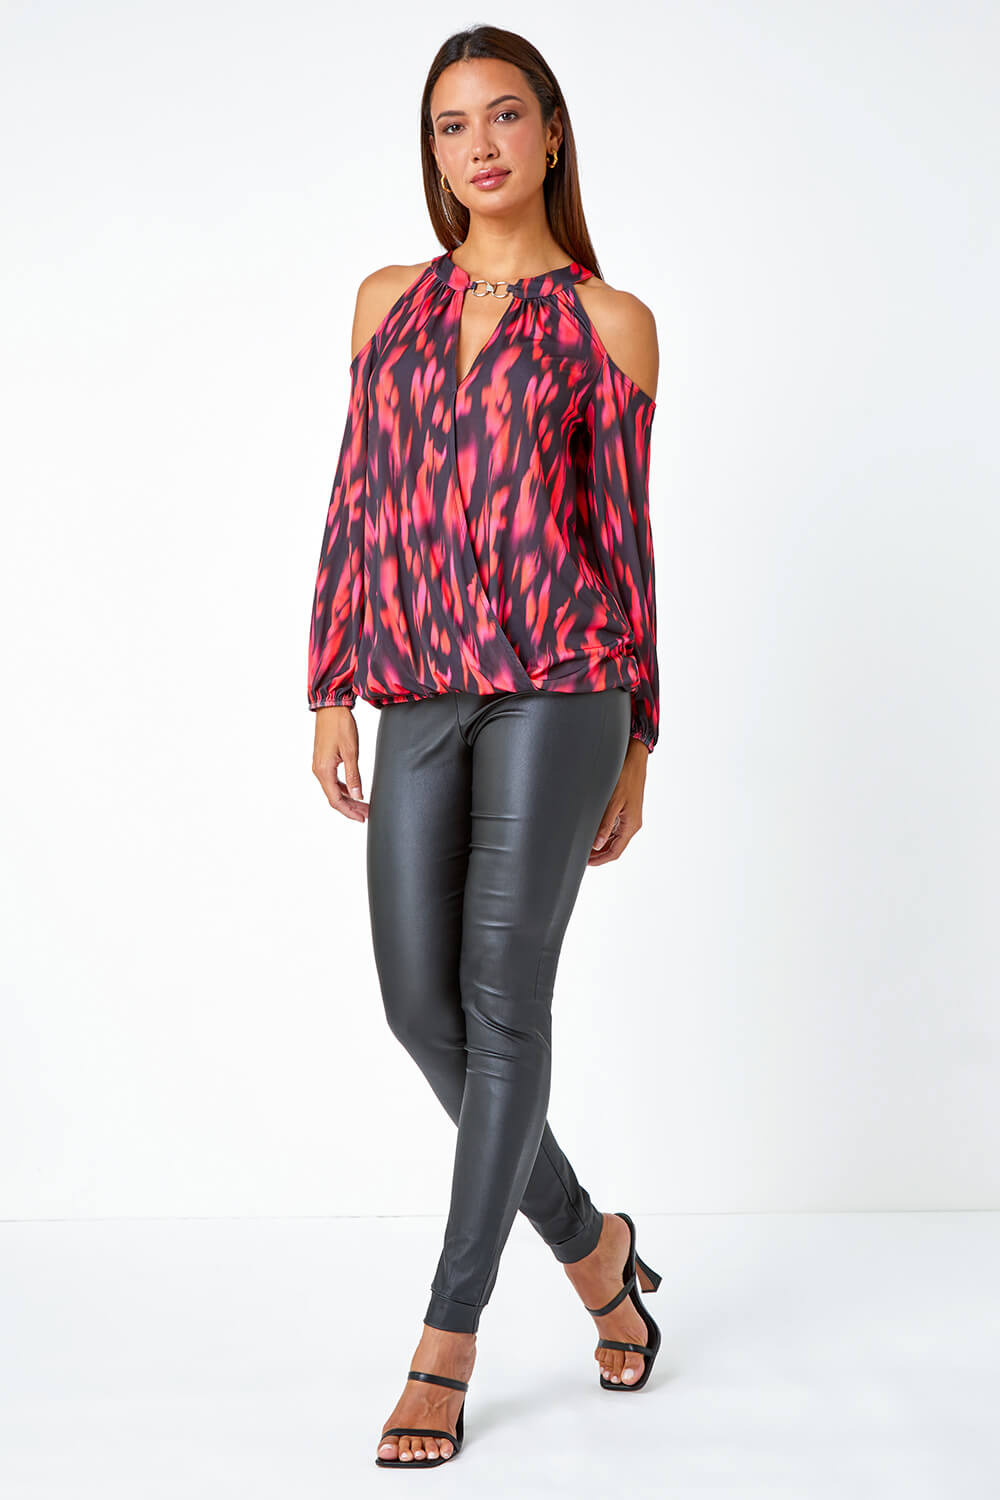 Fuchsia Abstract Print Cold Shoulder Stretch Top, Image 2 of 5